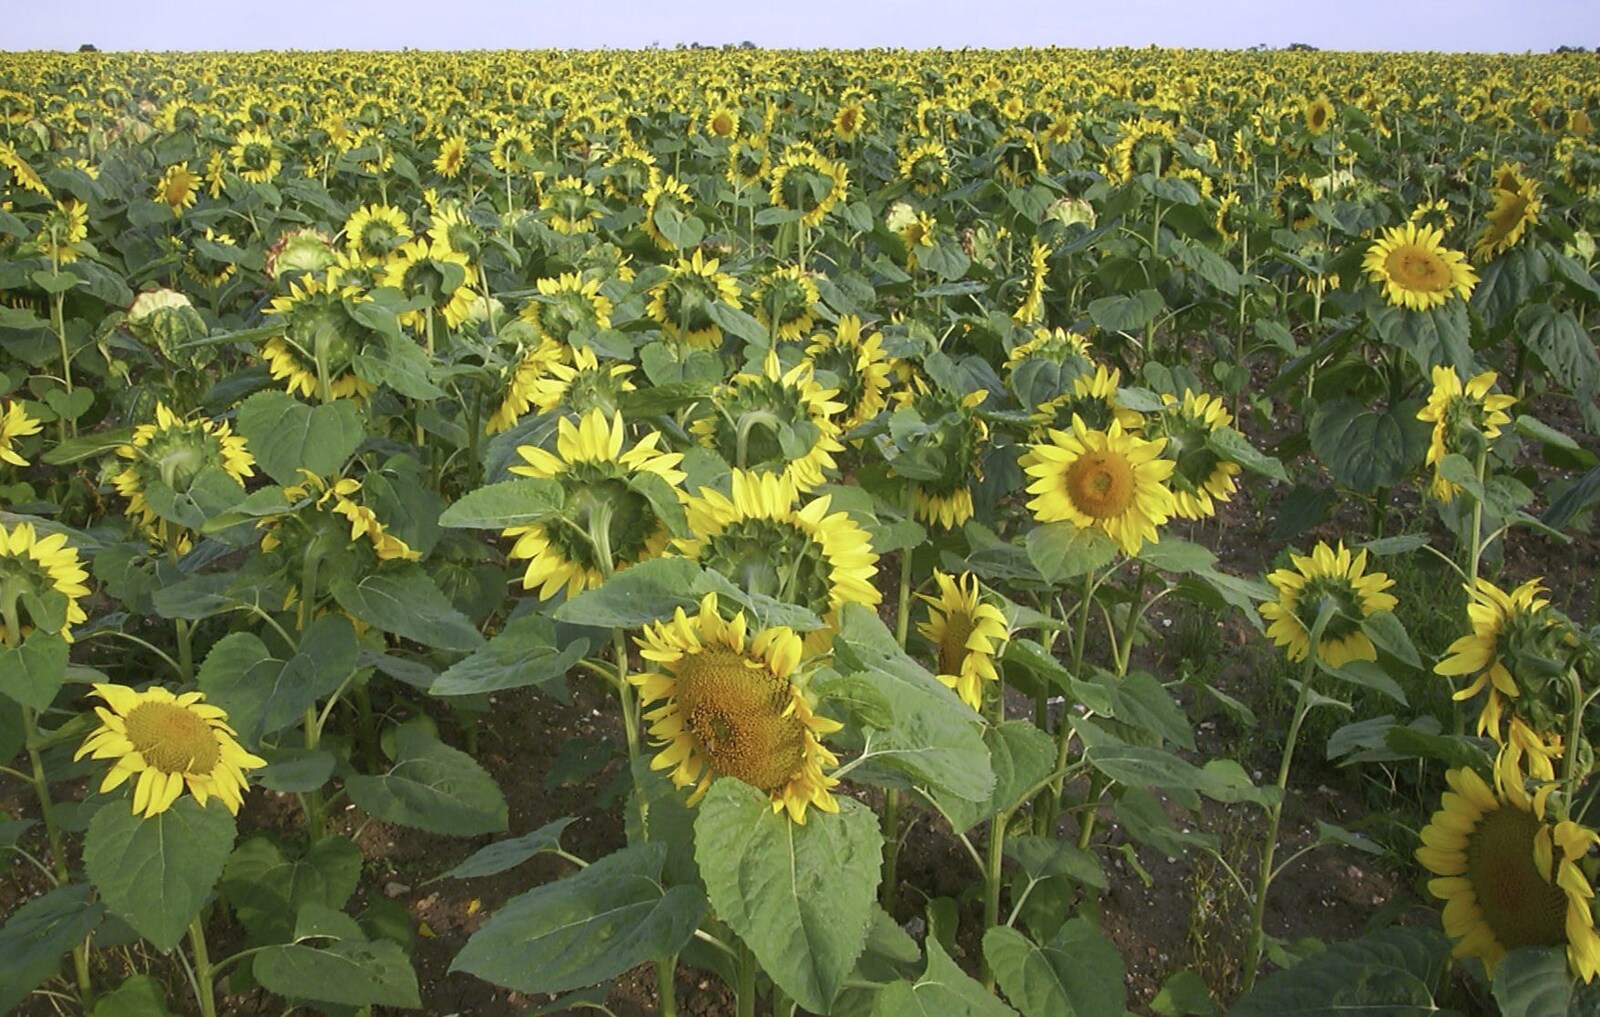 A field of sunflowers near Yaxley from 3G Lab Moves Offices, Milton Road, Cambourne and Cambridge - 27th August 2001